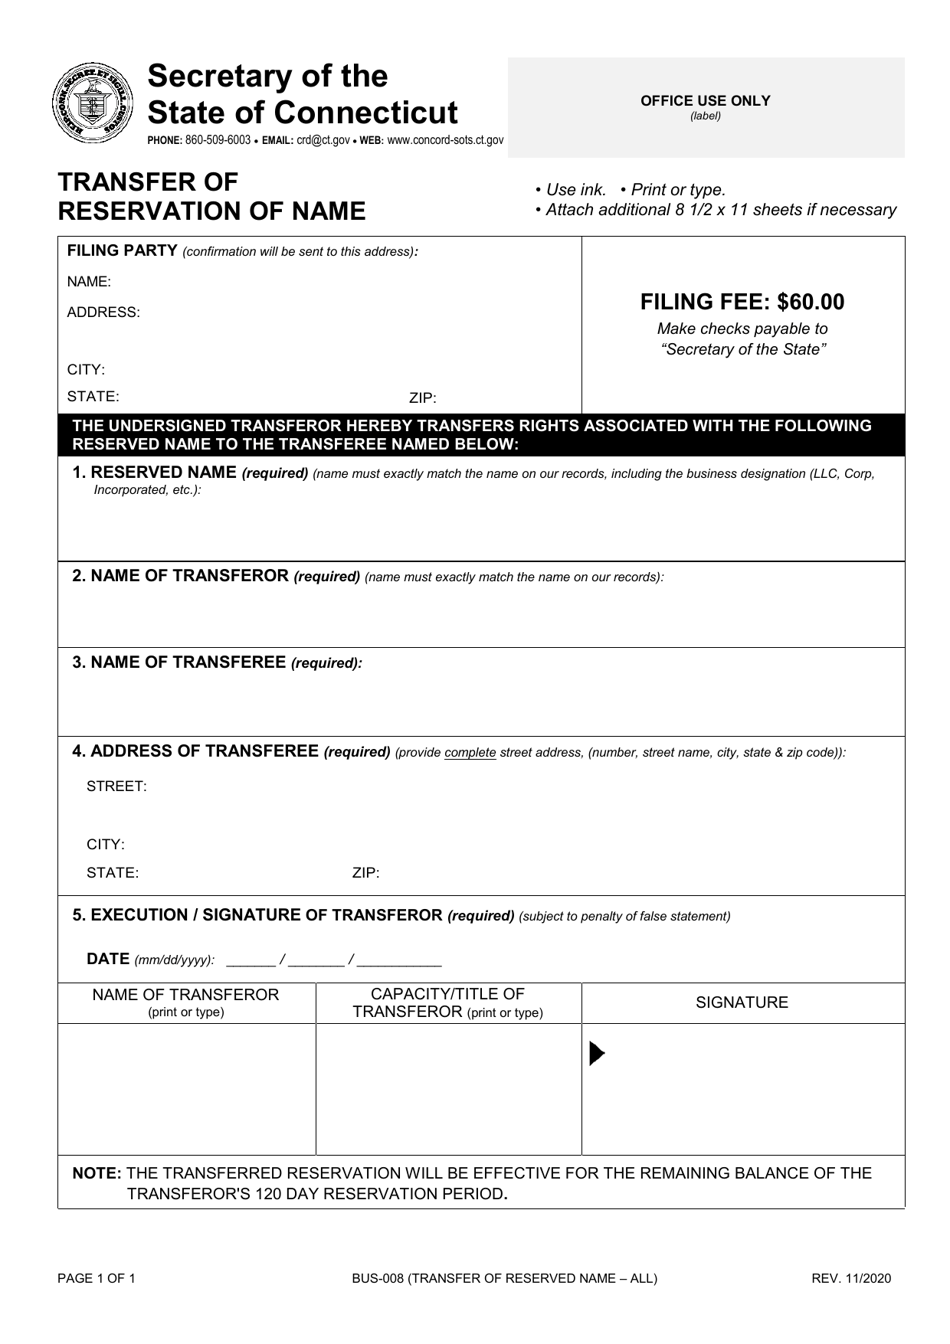 Form BUS-008 Transfer of Reservation of Name - Connecticut, Page 1